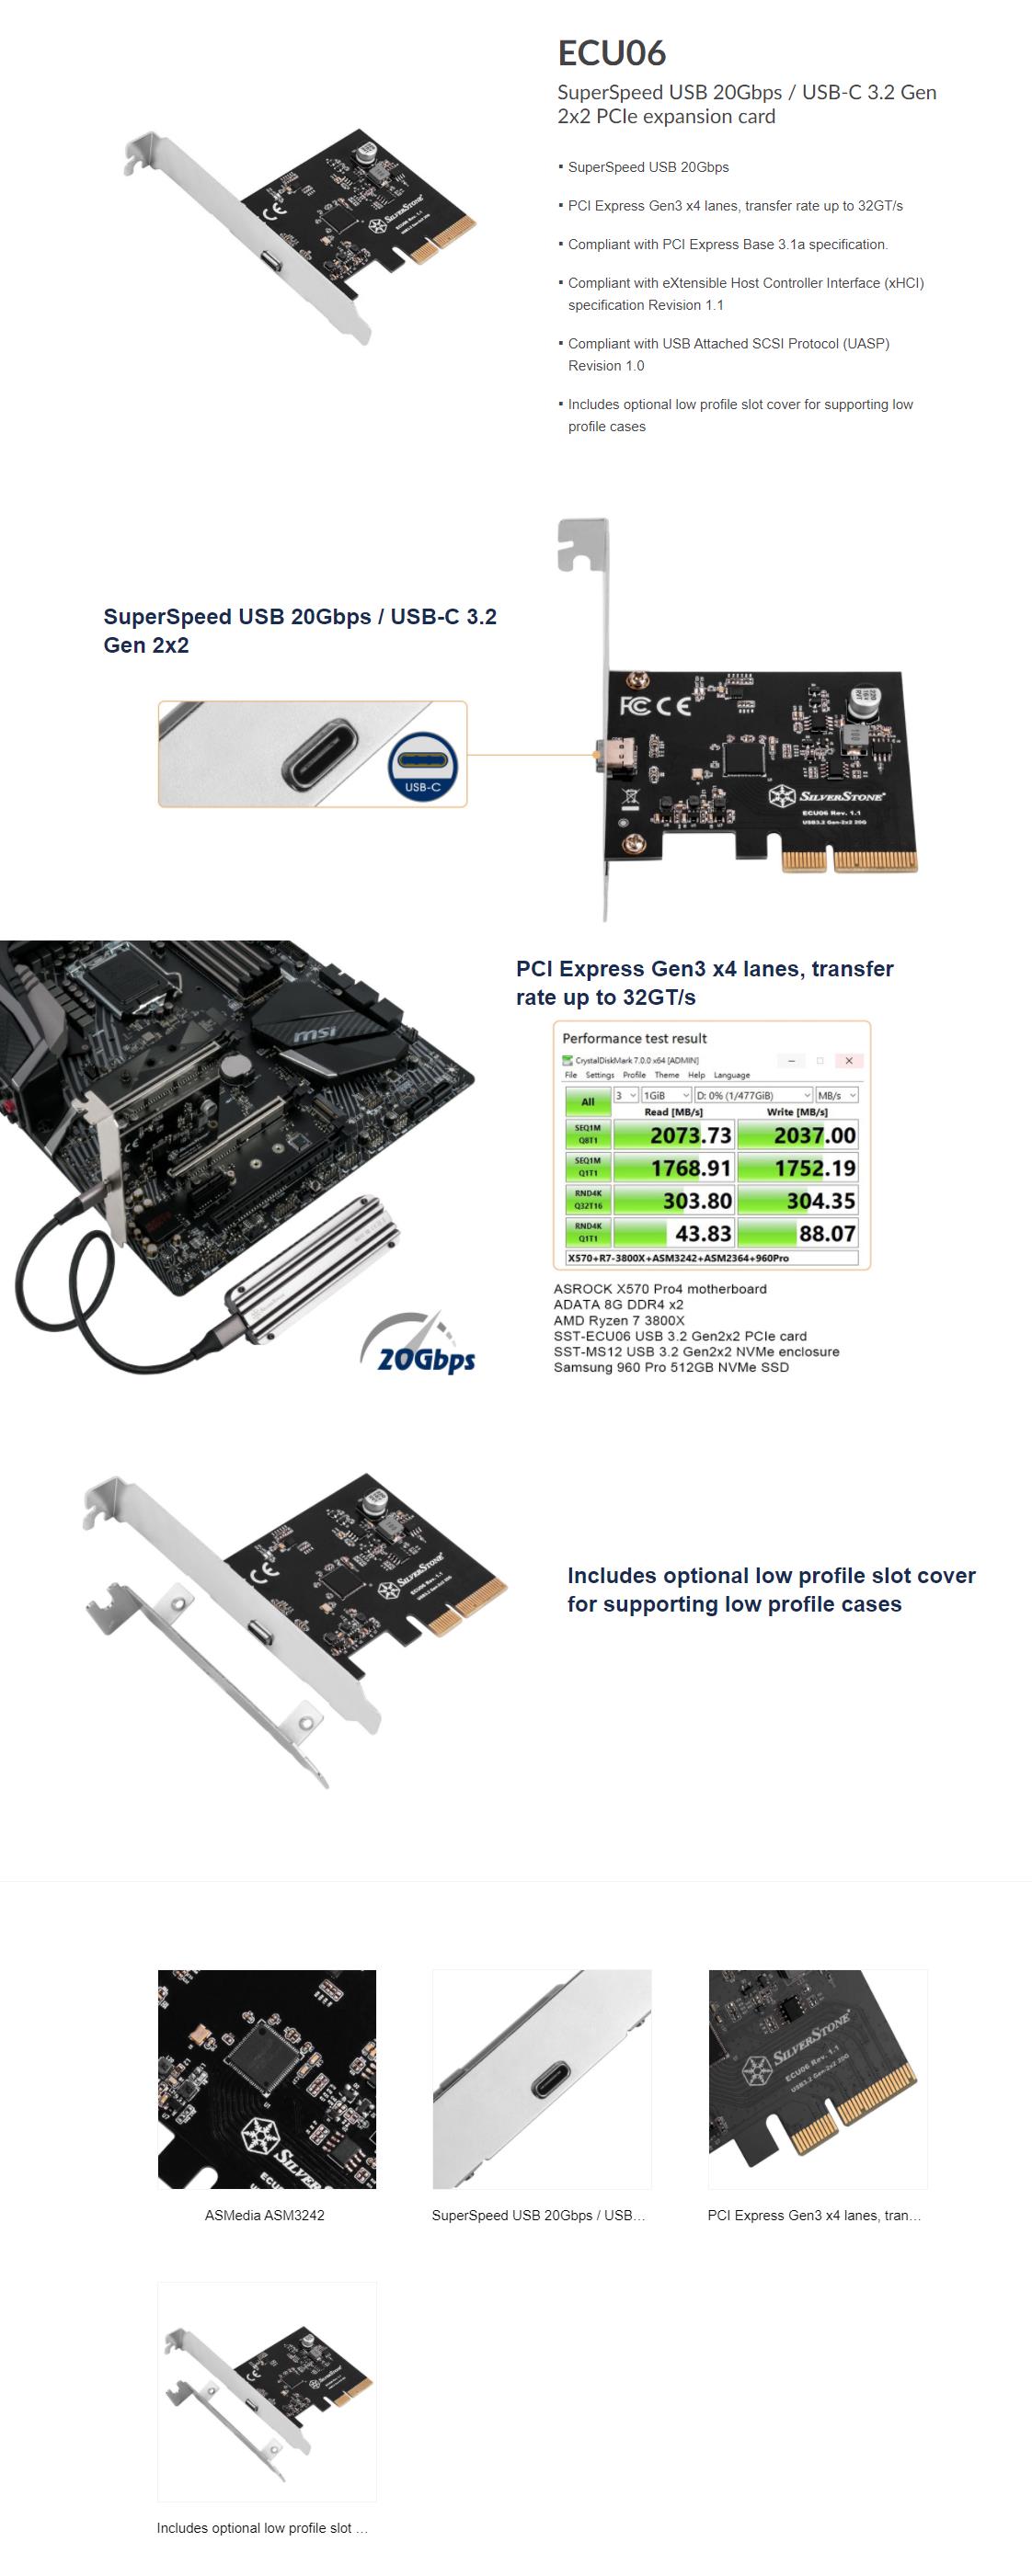 A large marketing image providing additional information about the product SilverStone ECU06 USB 3.2 Controller Card - Additional alt info not provided